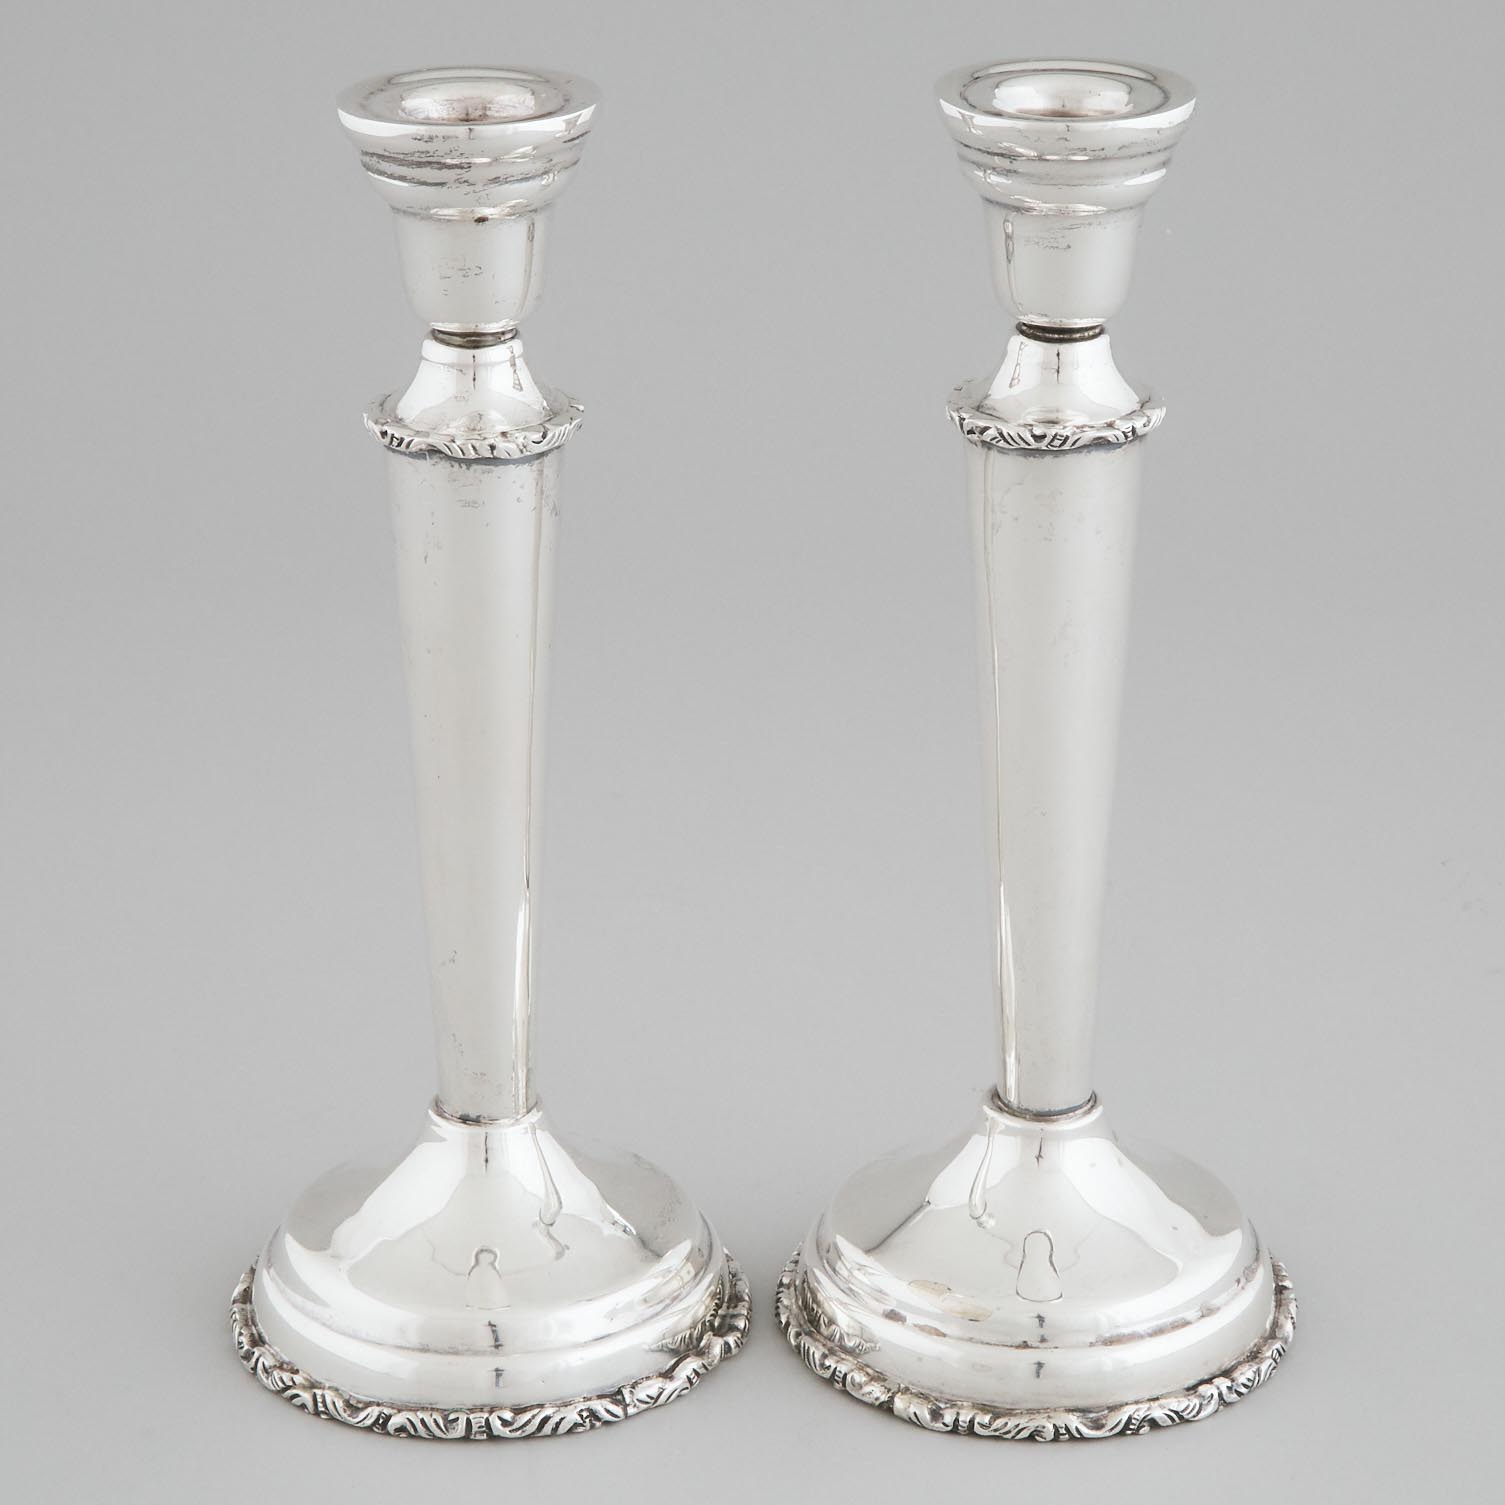 Pair of Mexican Silver Table Candlesticks,